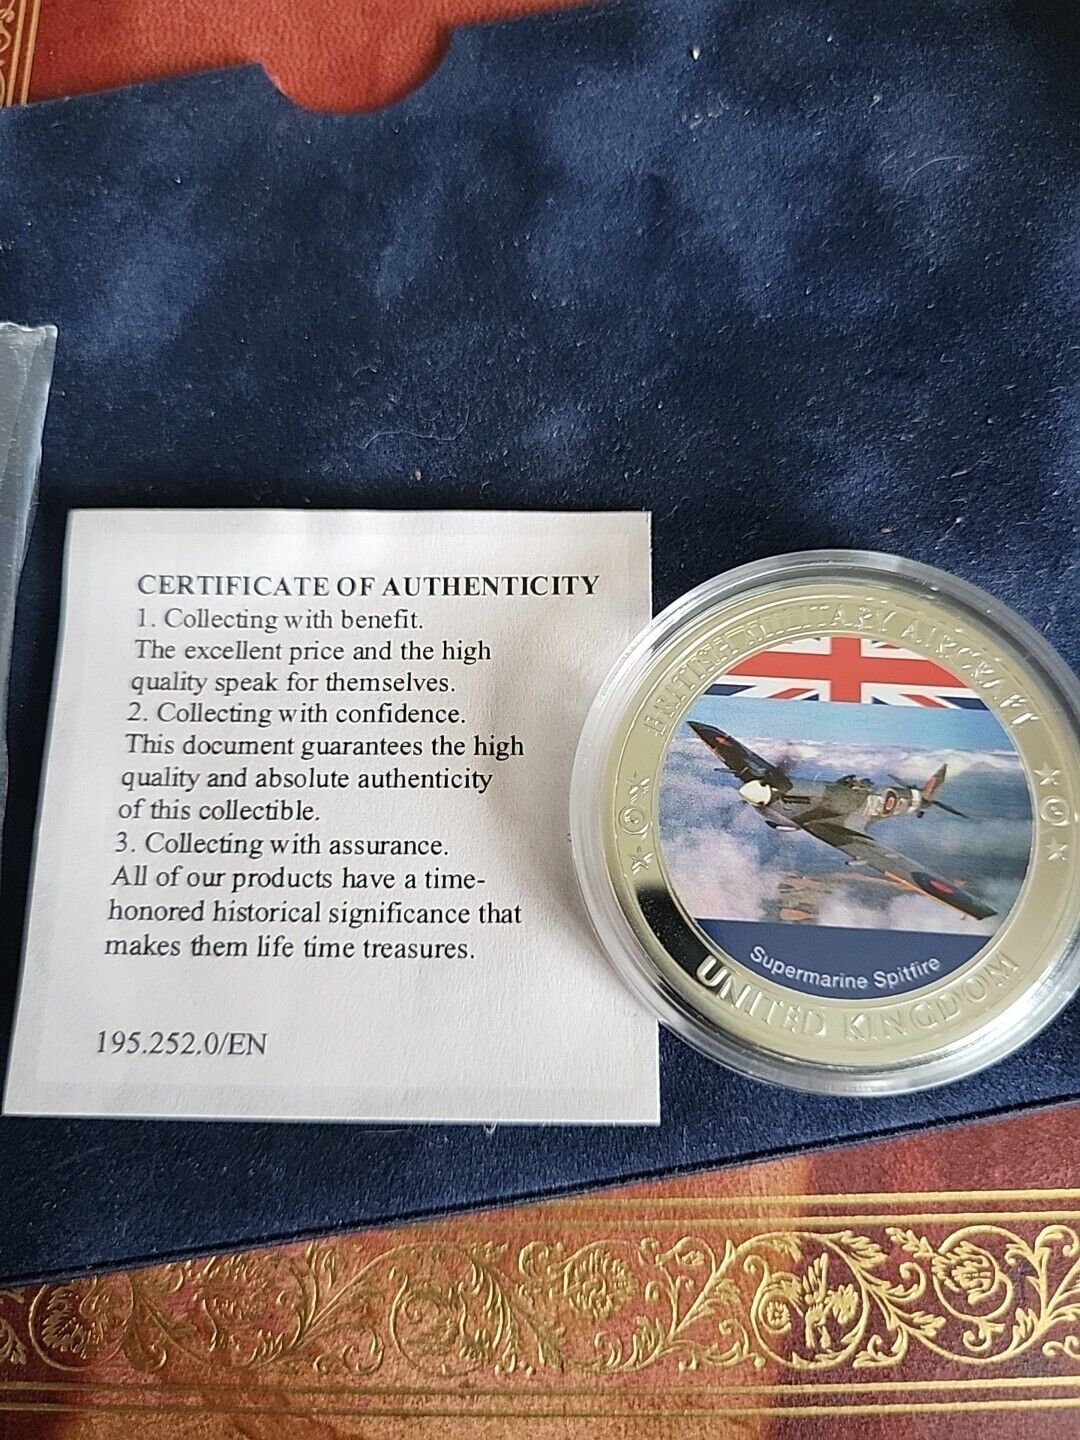 SUPERMARINE SPITFIRE 40mm SILVER PLATED PROOF MEDAL WITH COLOUR TABLEAU - coa